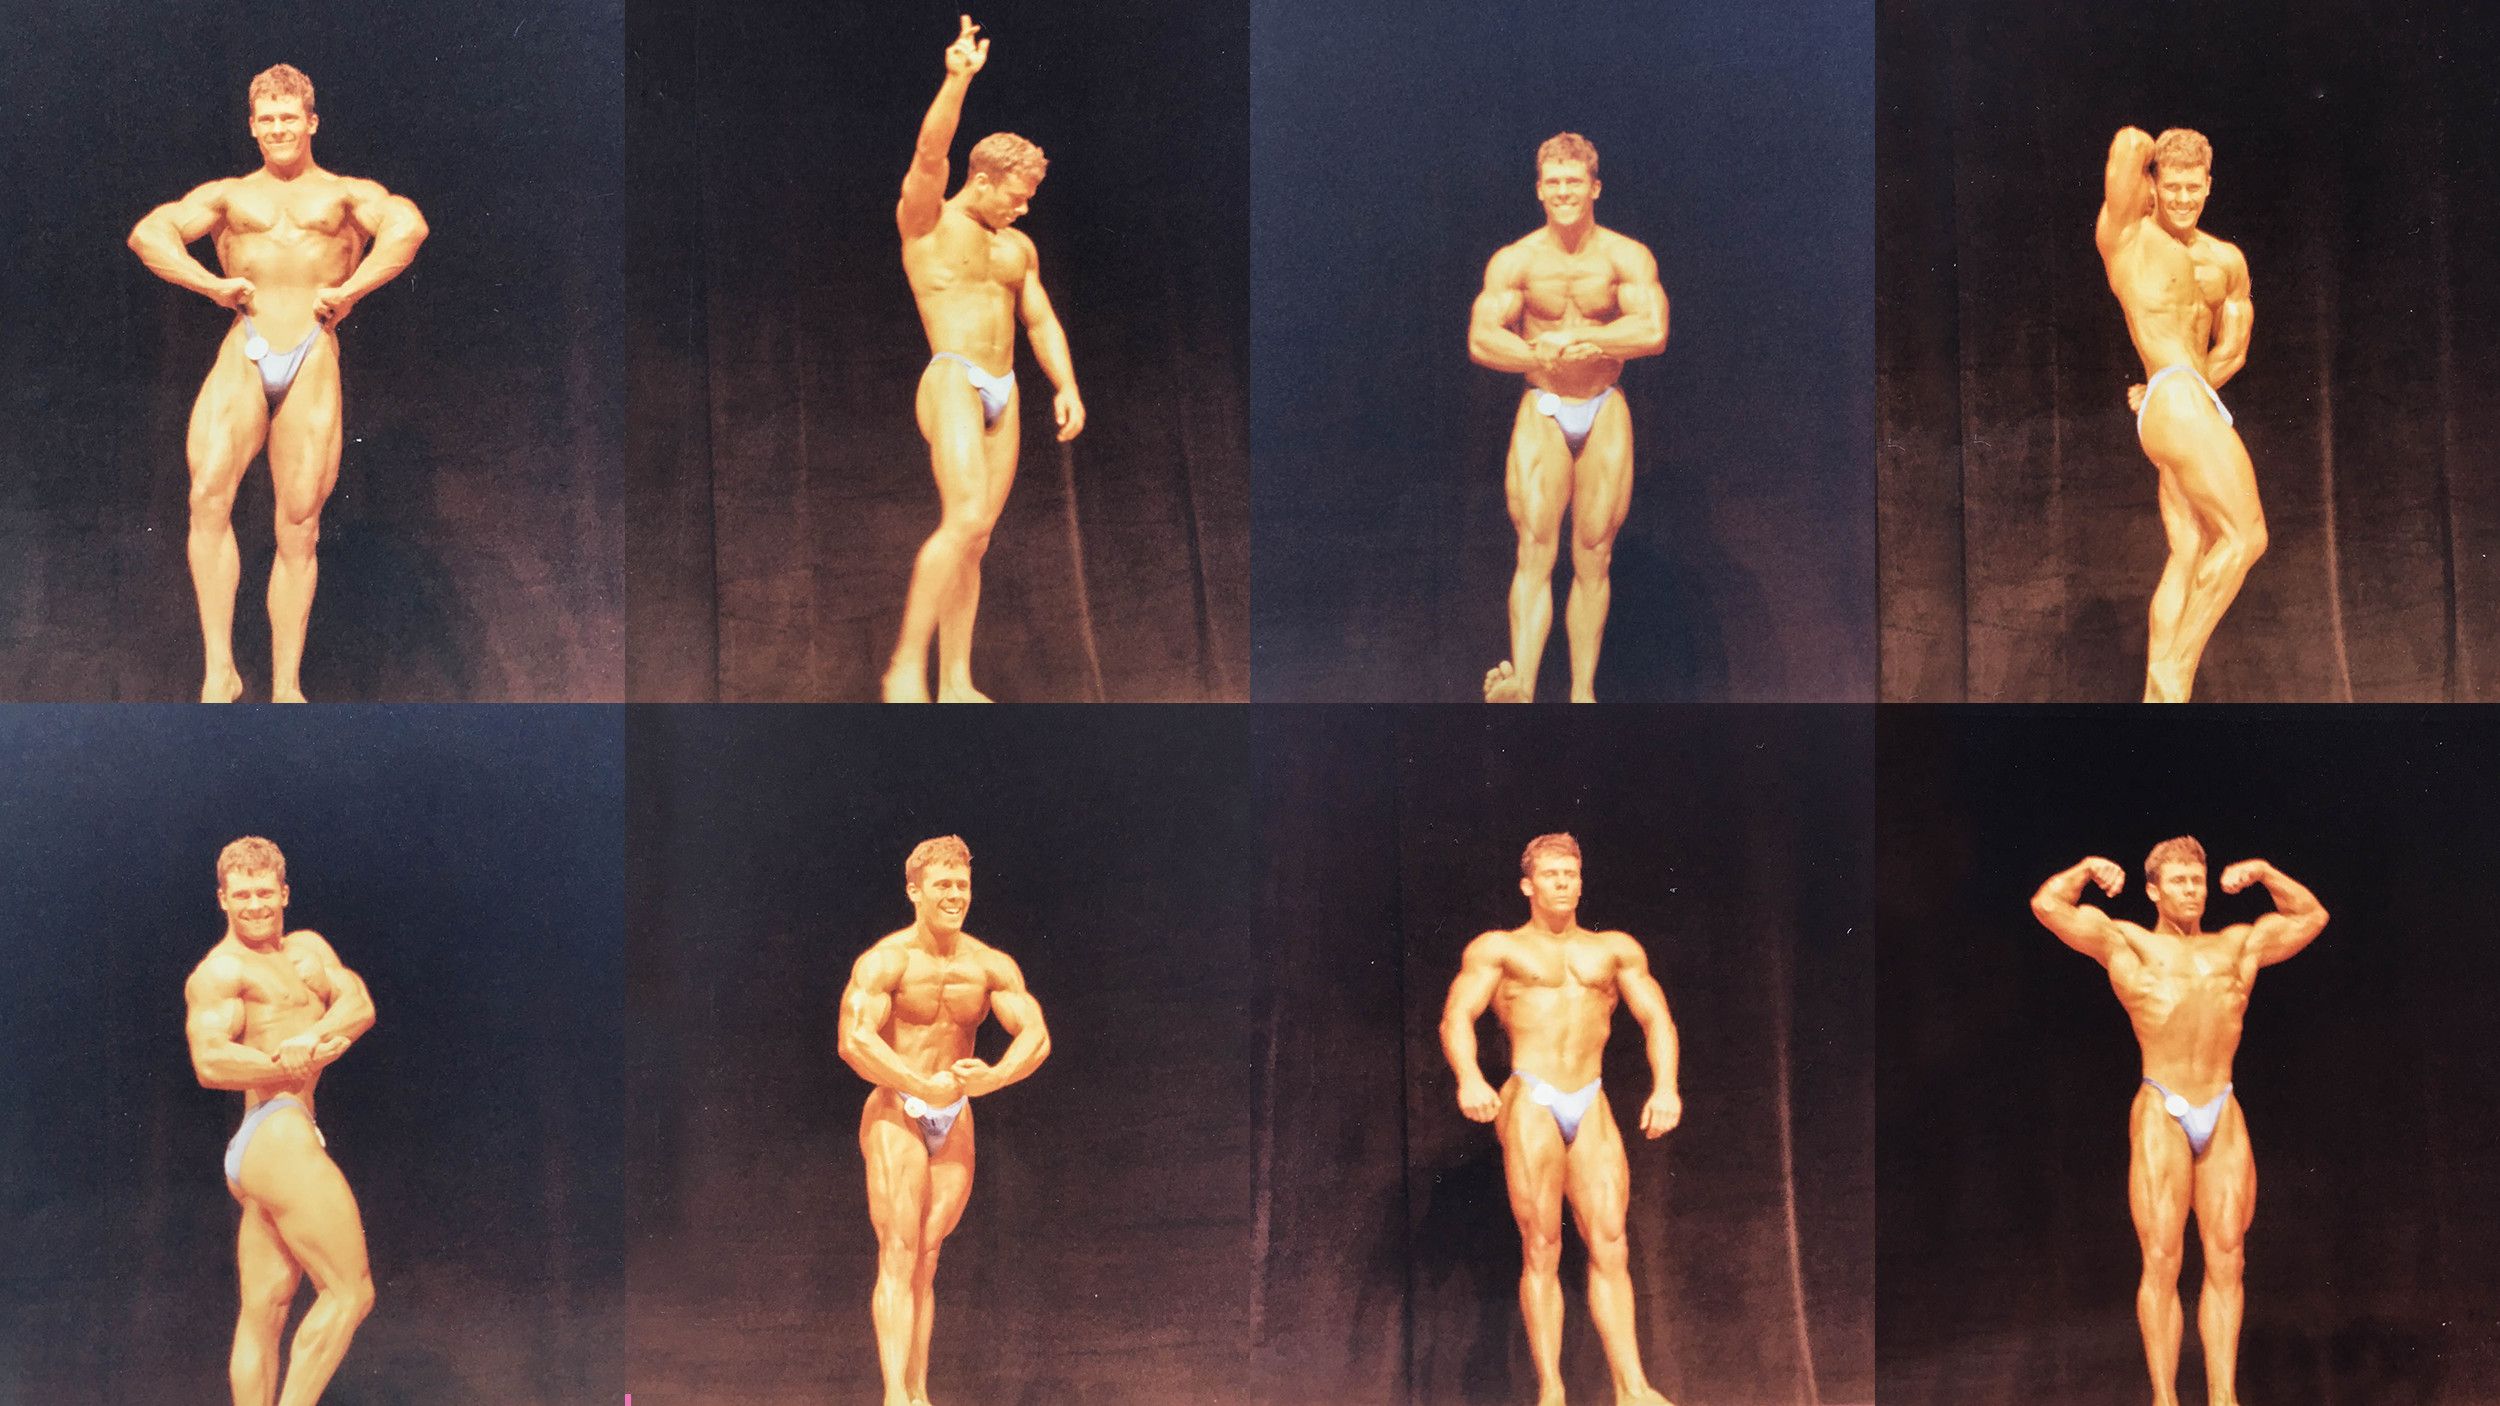 Embarassed Nude Beach - Ripped: My Life as a Competitive Bodybuilder